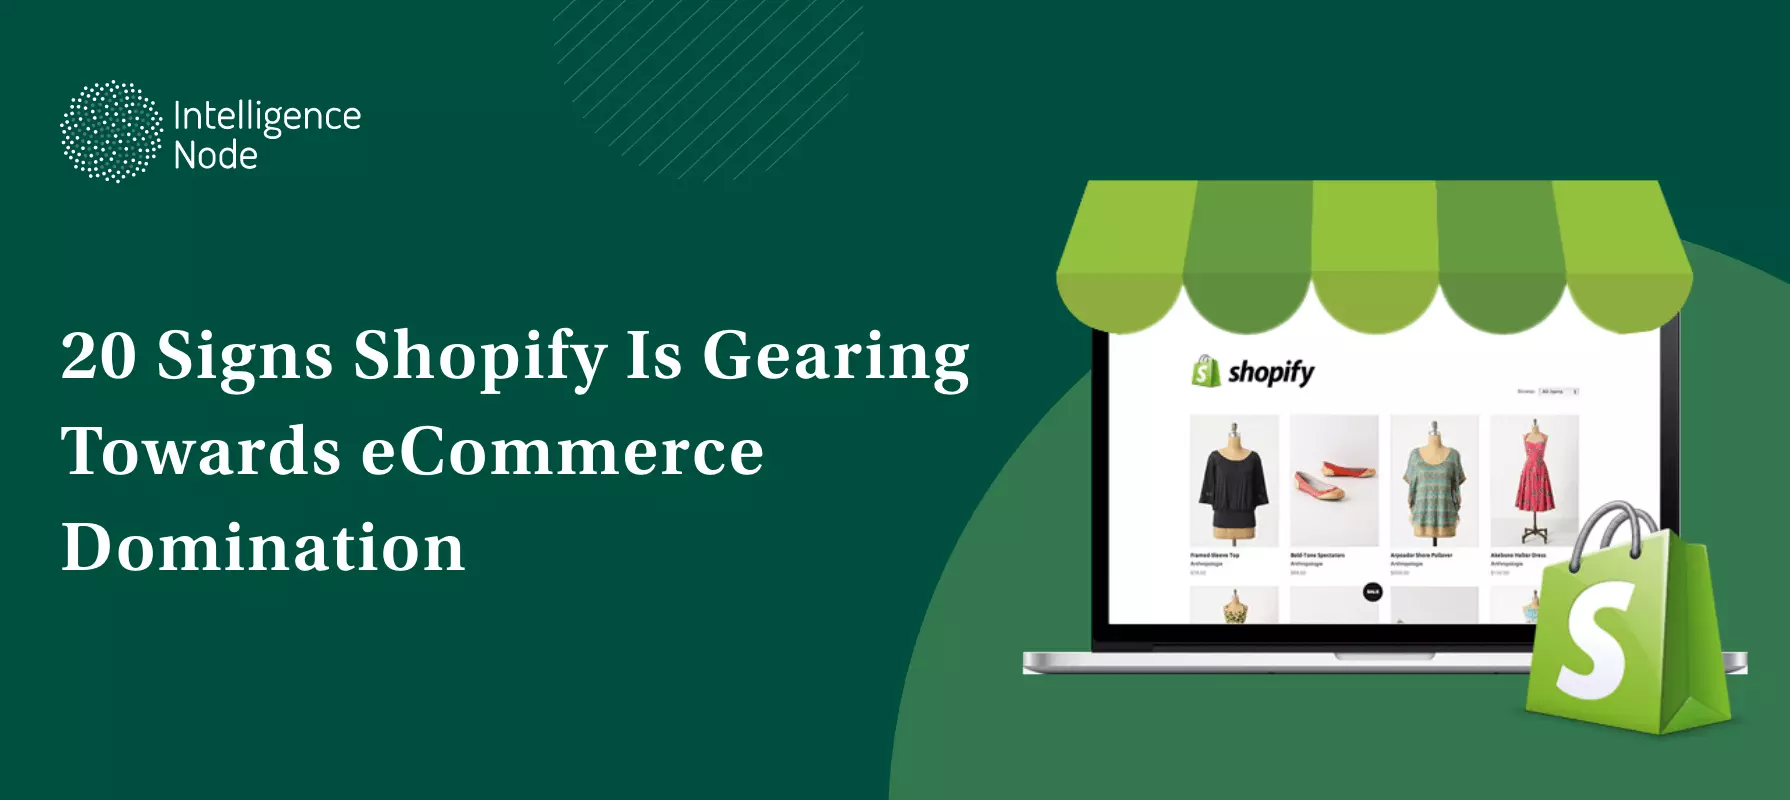 20 signs shopify